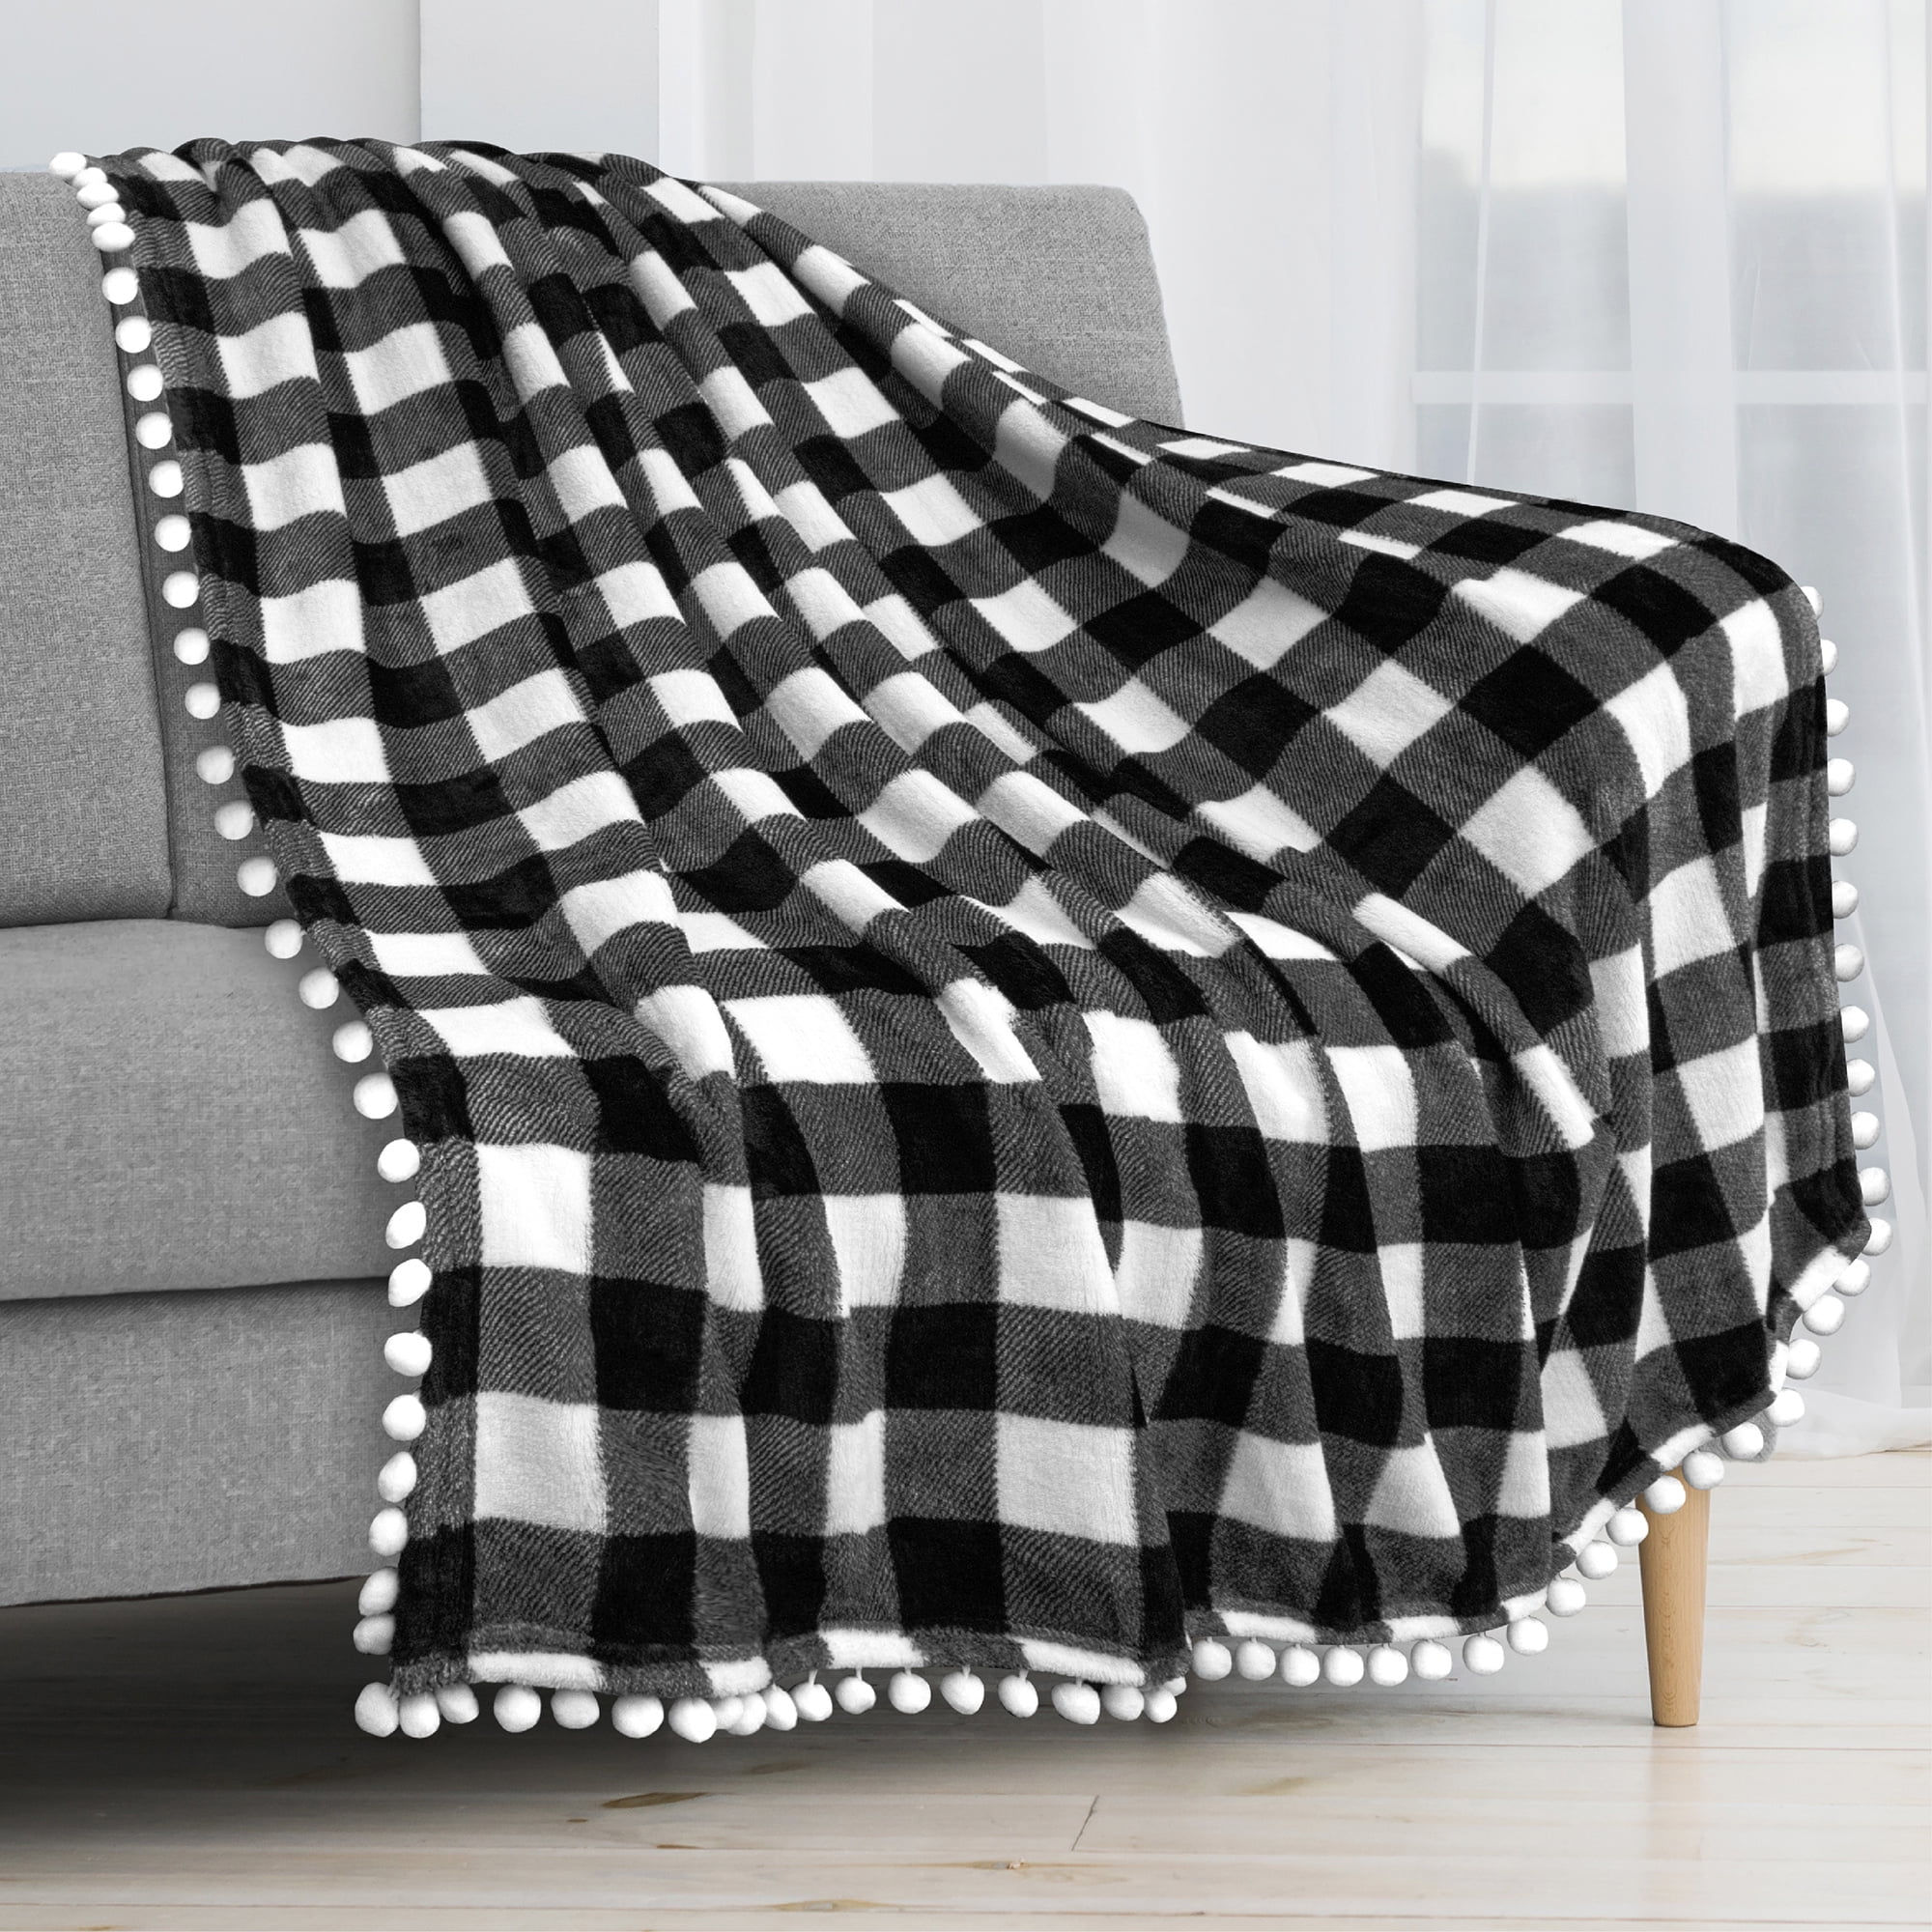 Striped Throw Blanket Black and White for Bed Couch Soft Fleece Comforter 50x60 Small Flannel Outdoor Microfiber Cozy Comfy Decorative for All Season 